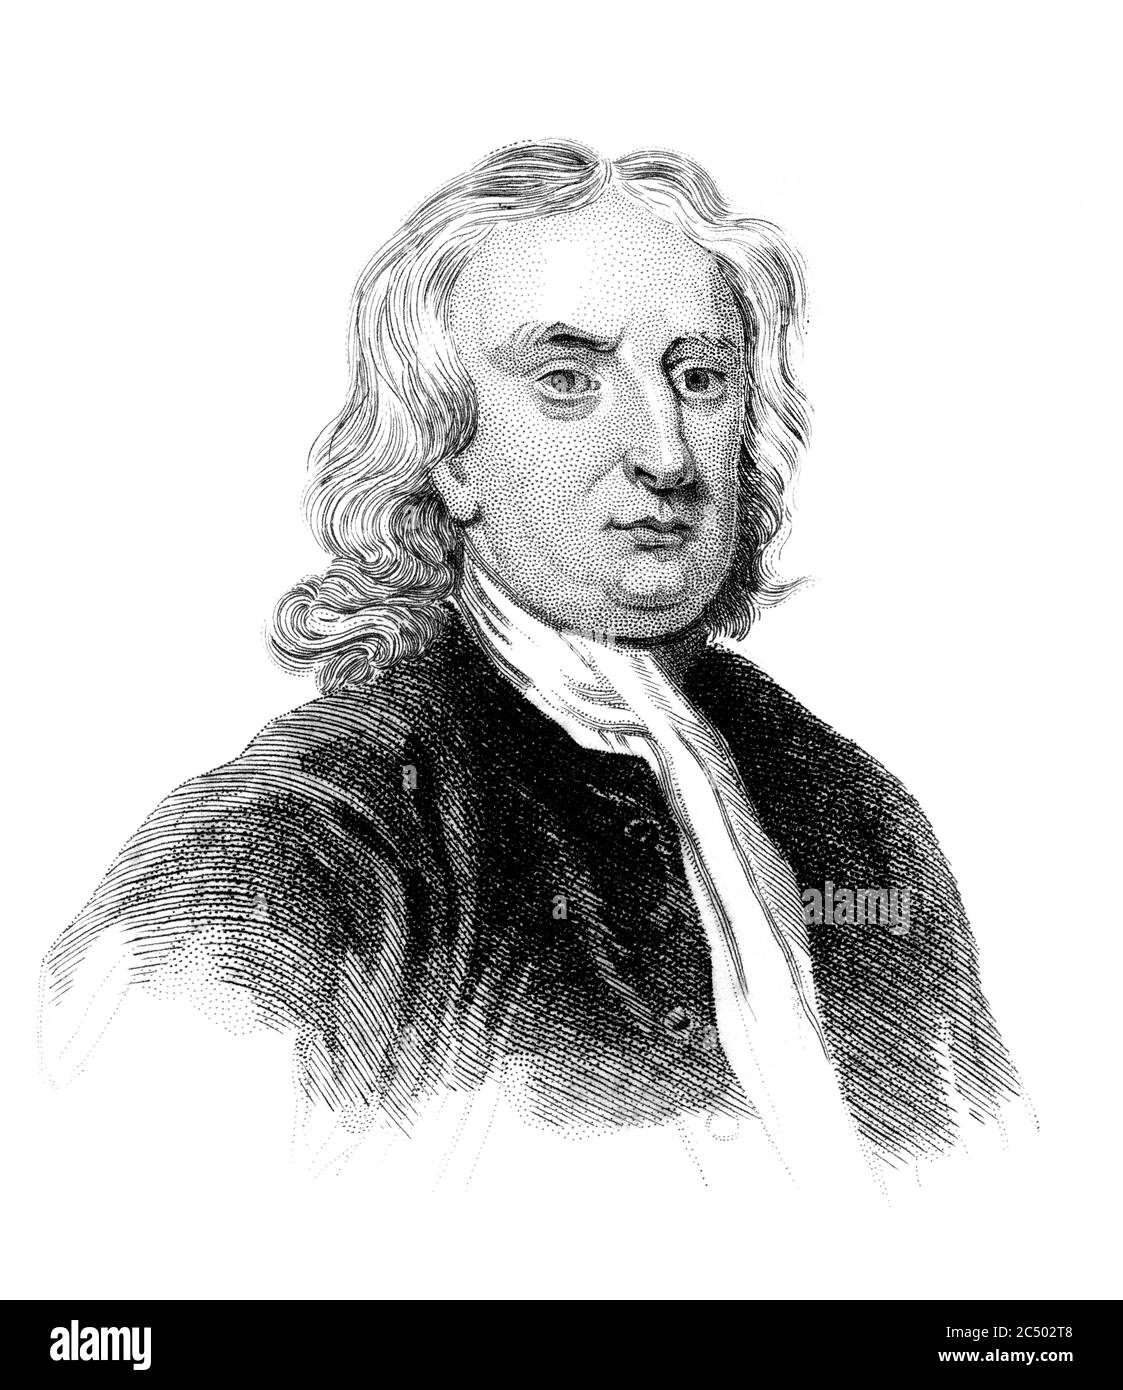 An engraved vintage illustration portrait image of Sir Isaac Newton 1643-1727 the famous English physicist, from a Victorian book dated 1847 that is n Stock Photo